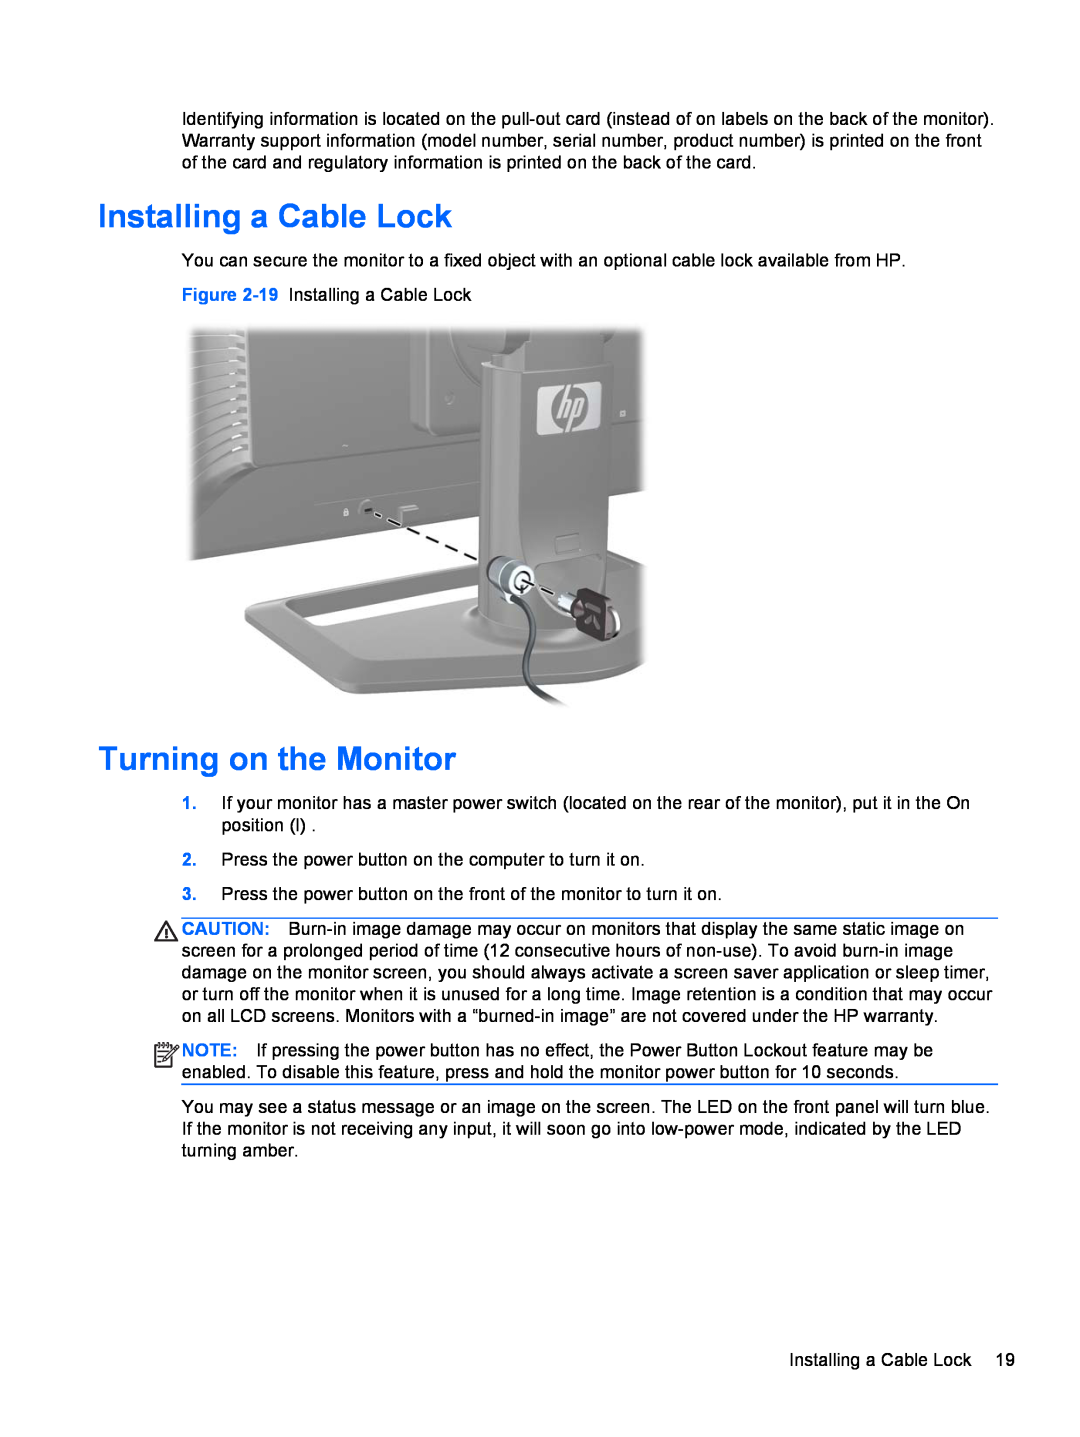 HP ZR2740w 27-inch IPS manual Installing a Cable Lock, Turning on the Monitor 